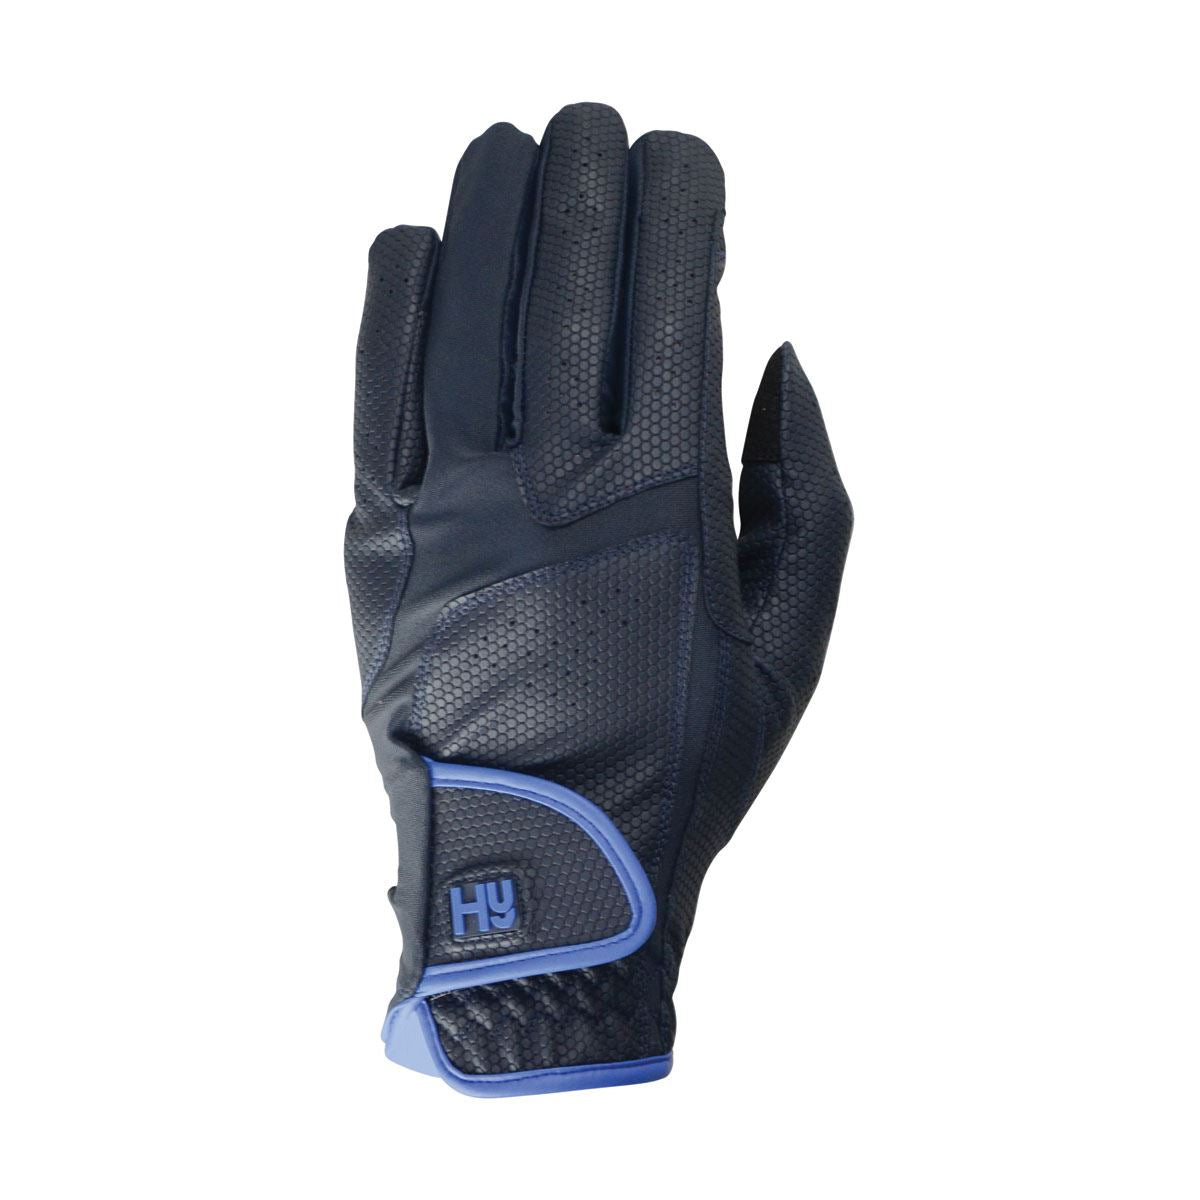 Hy Sport Active Riding Gloves - Just Horse Riders